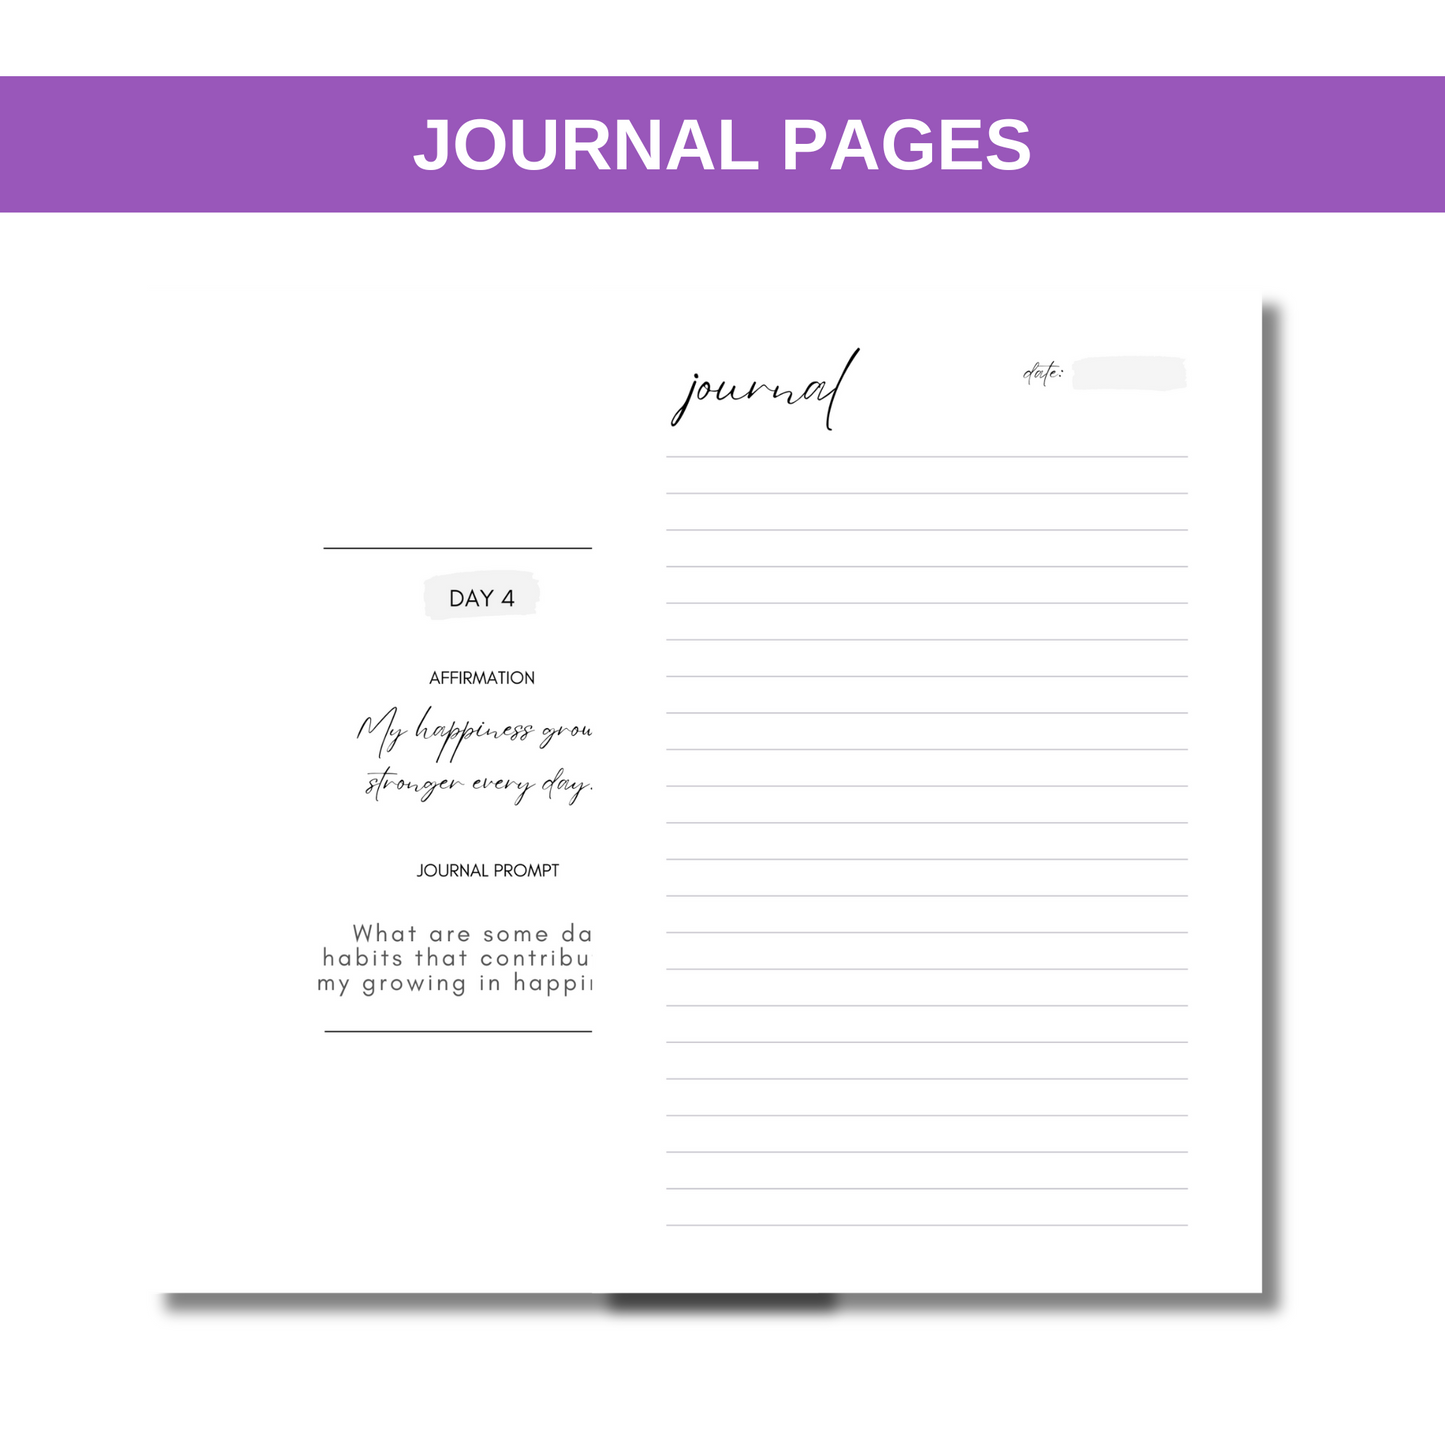 I am in Control of my Happiness - 30 Day Affirmation Journal